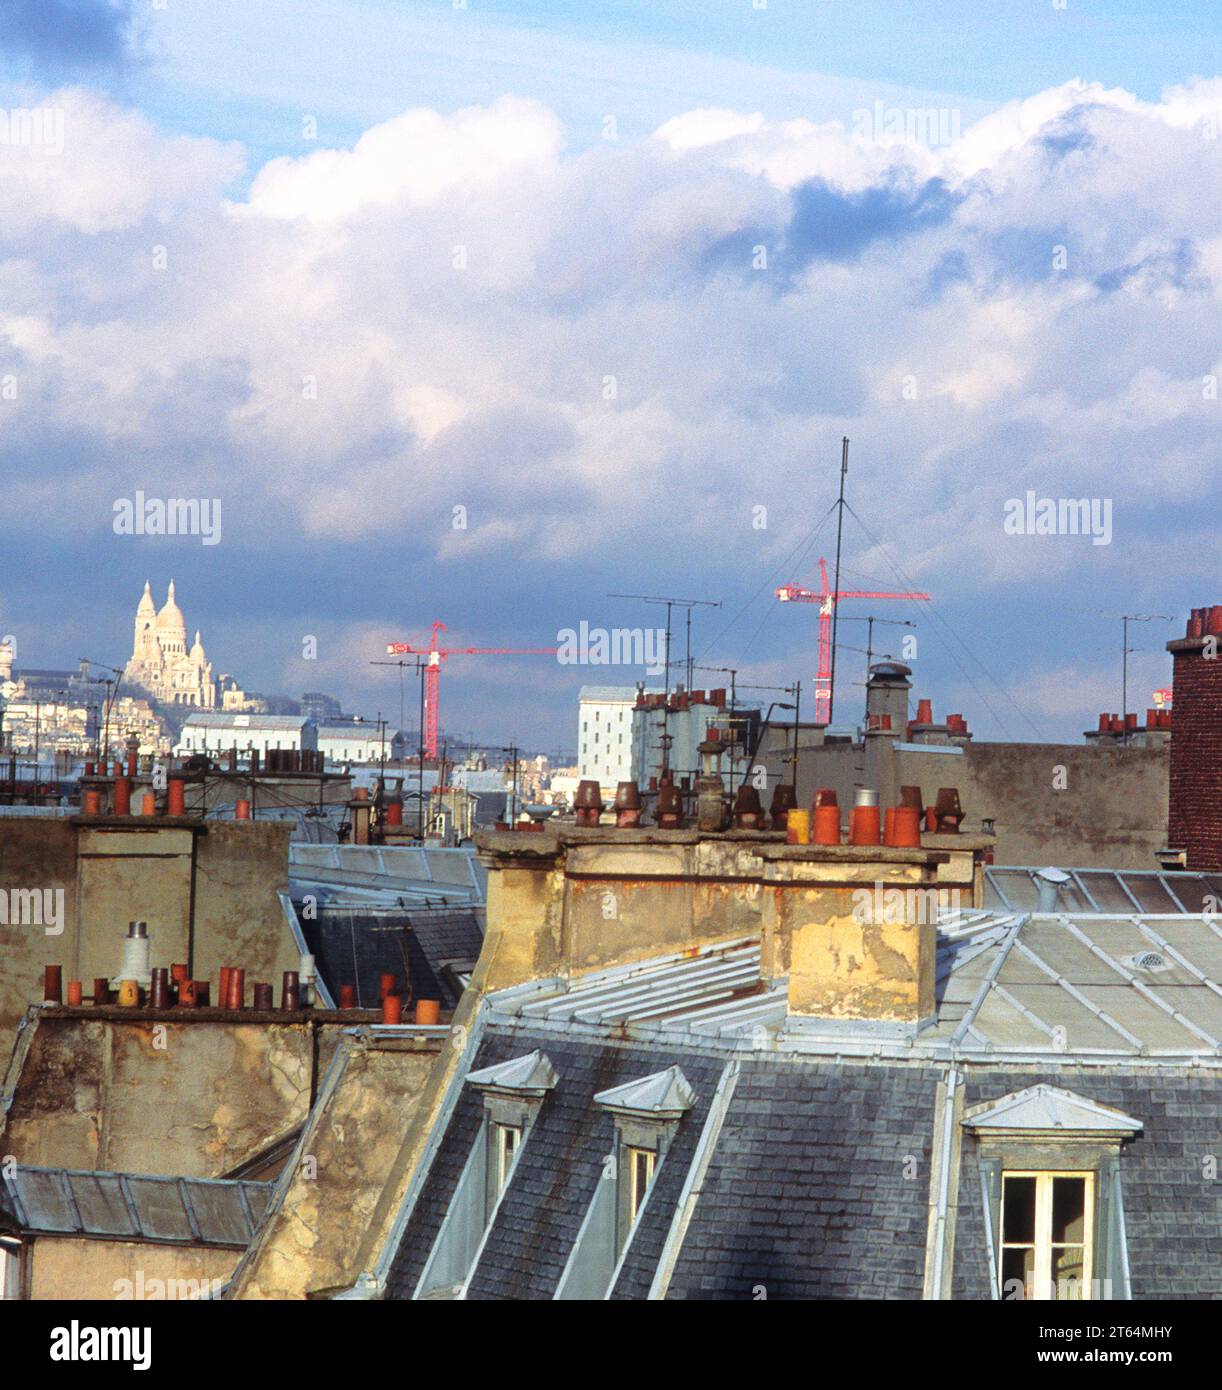 Sacre Coeur Basilica Montmartre, Paris. Distant view of the cathedral and rooftops of buildings. Scenic from window on the Left Bank. France, Europe Stock Photo